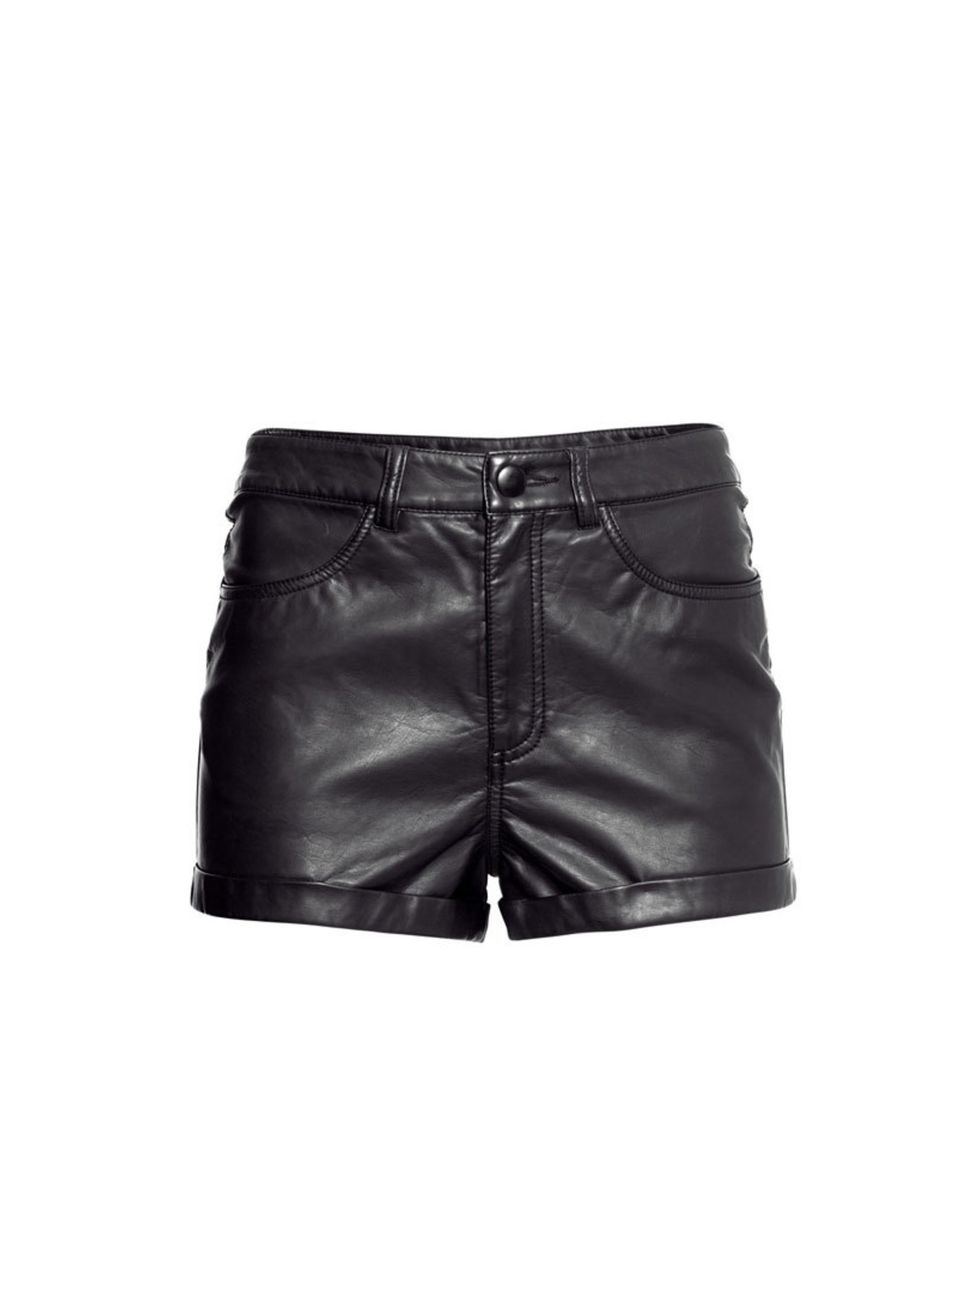 These shorts are perfect for sunny weather and great with tights in winter.

H&amp;M &pound;14.99